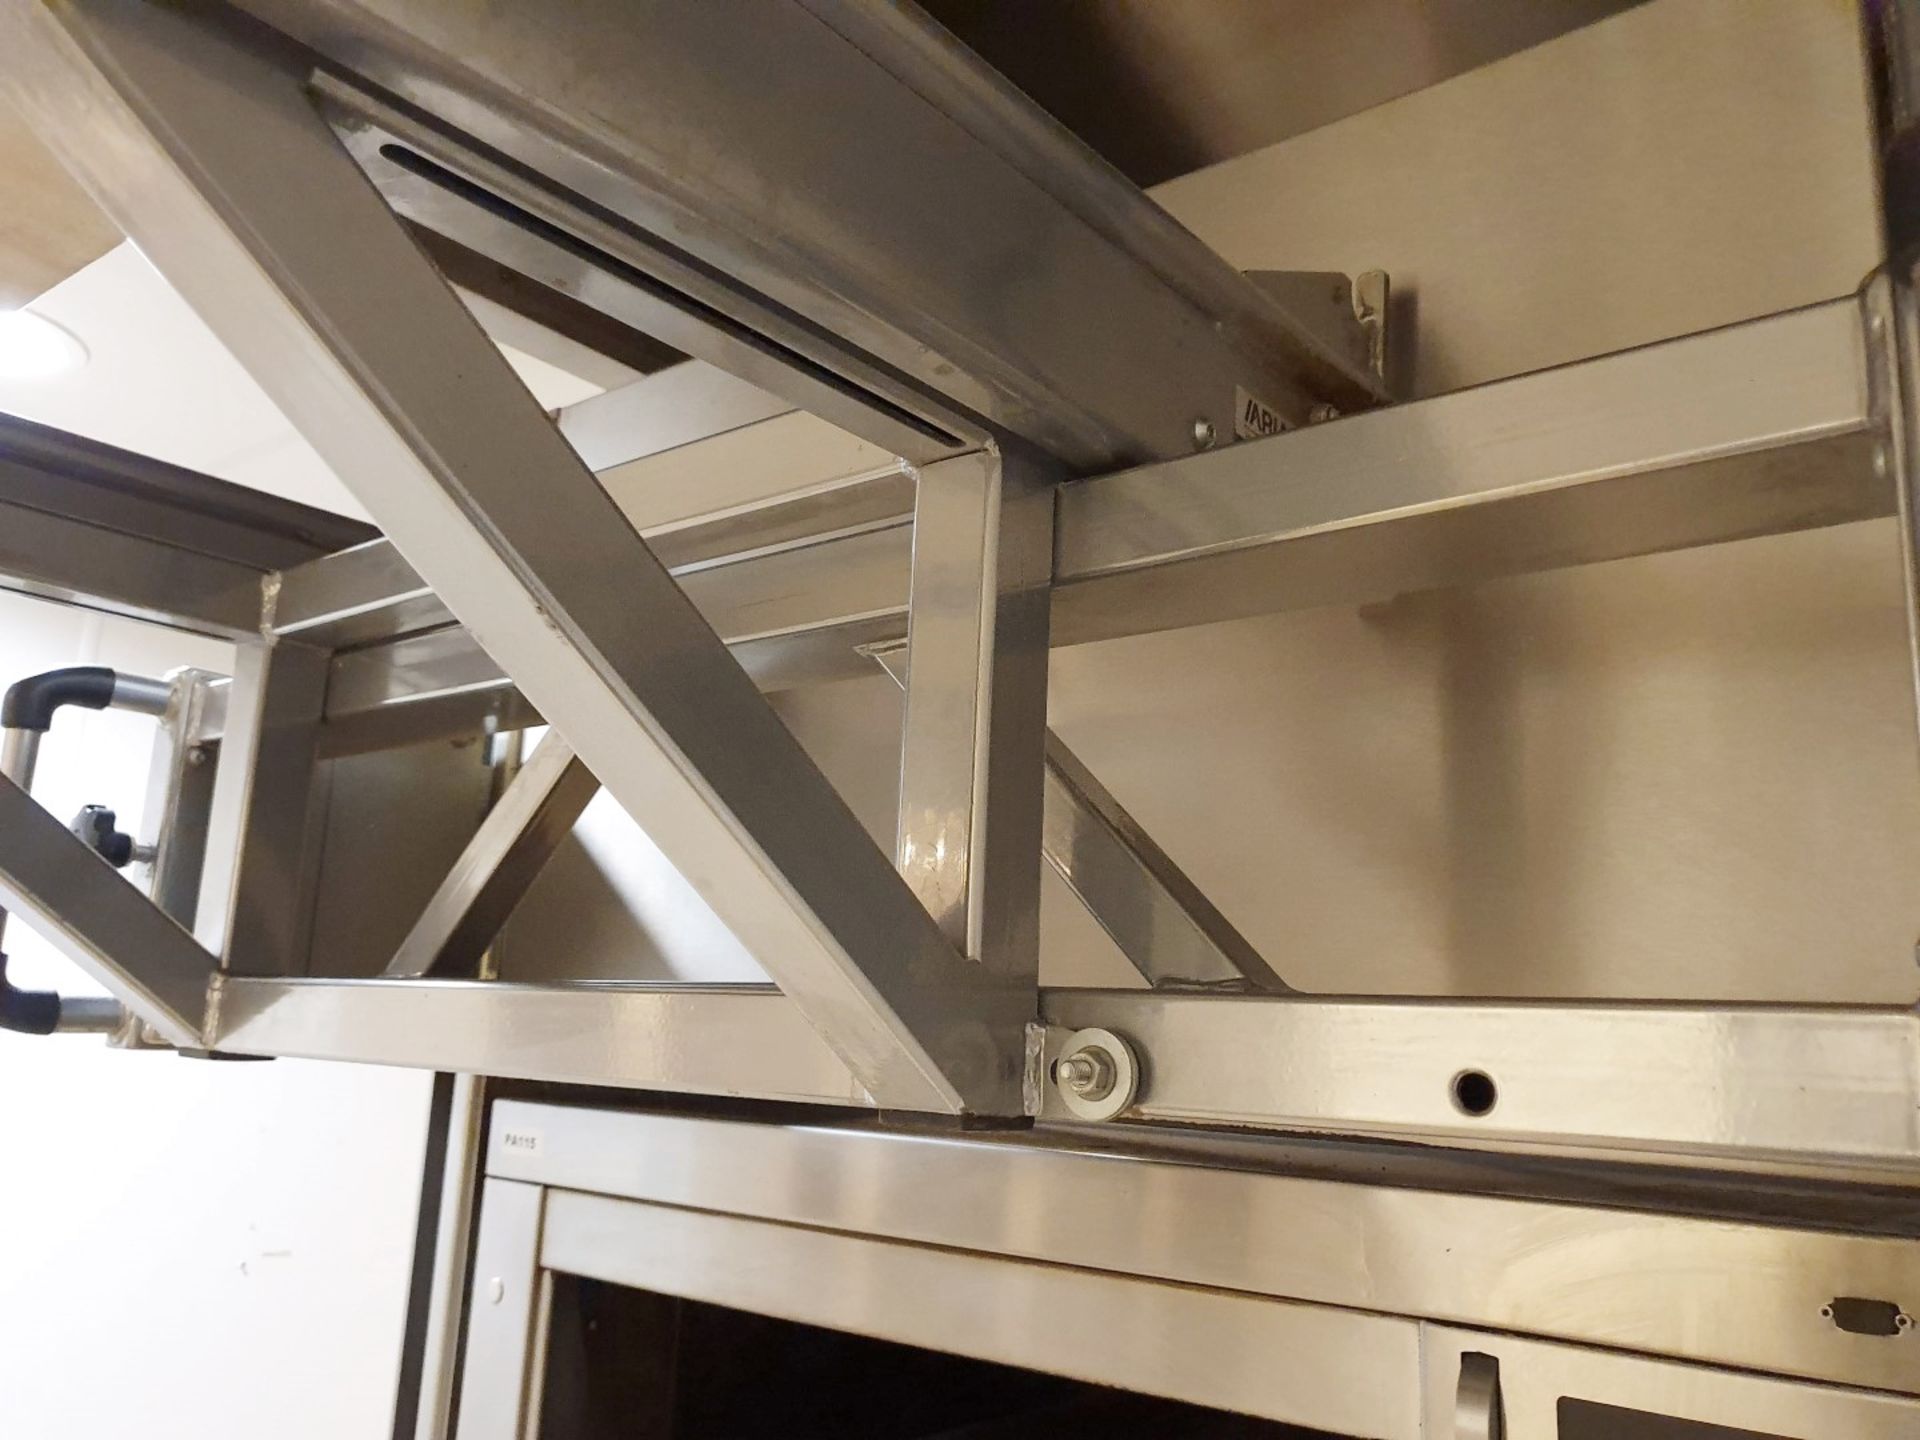 1 x Instoreoven Miwe Condo Heated Deck Bakery Oven With Four Chambers, Drop Down Prep Conveyor and - Image 23 of 35